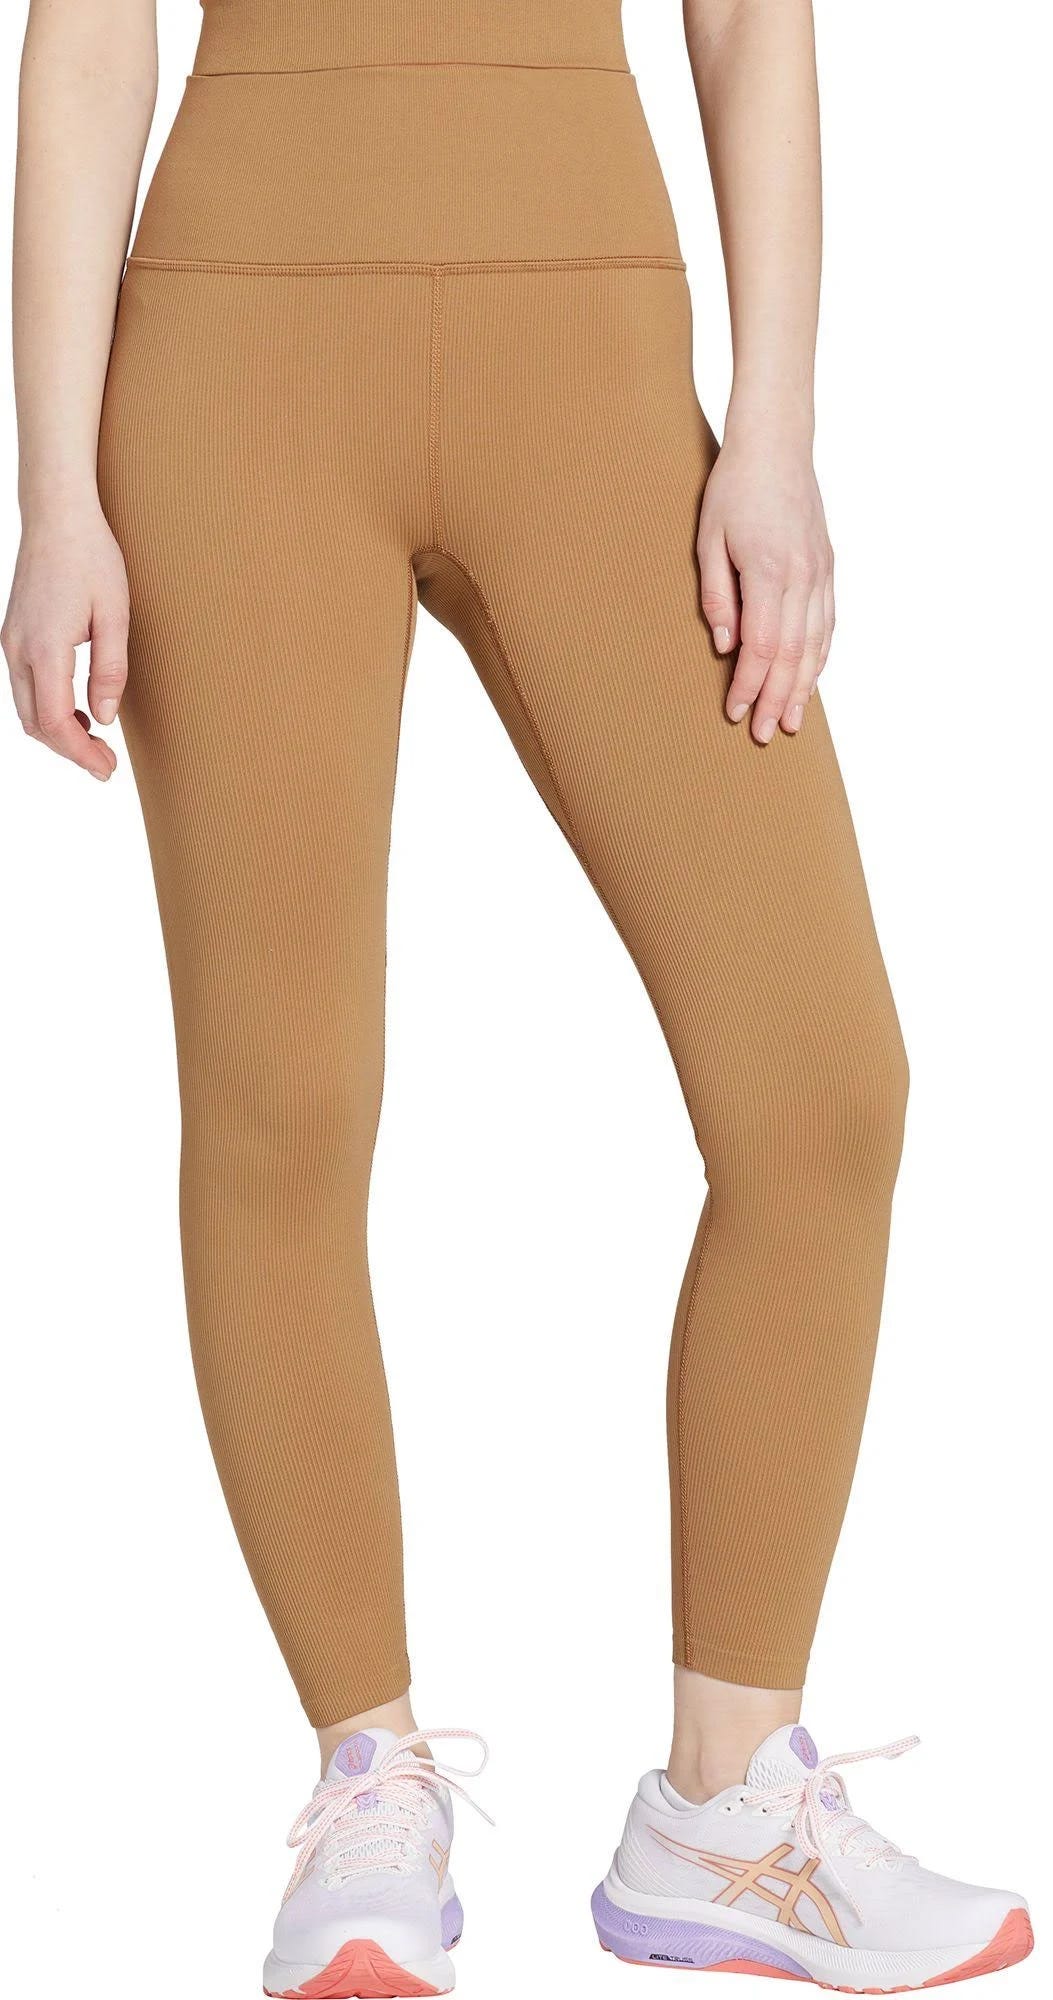 Dick's Sporting Goods Women's Moisture-Wicking Seamless Tights in Brown | Image